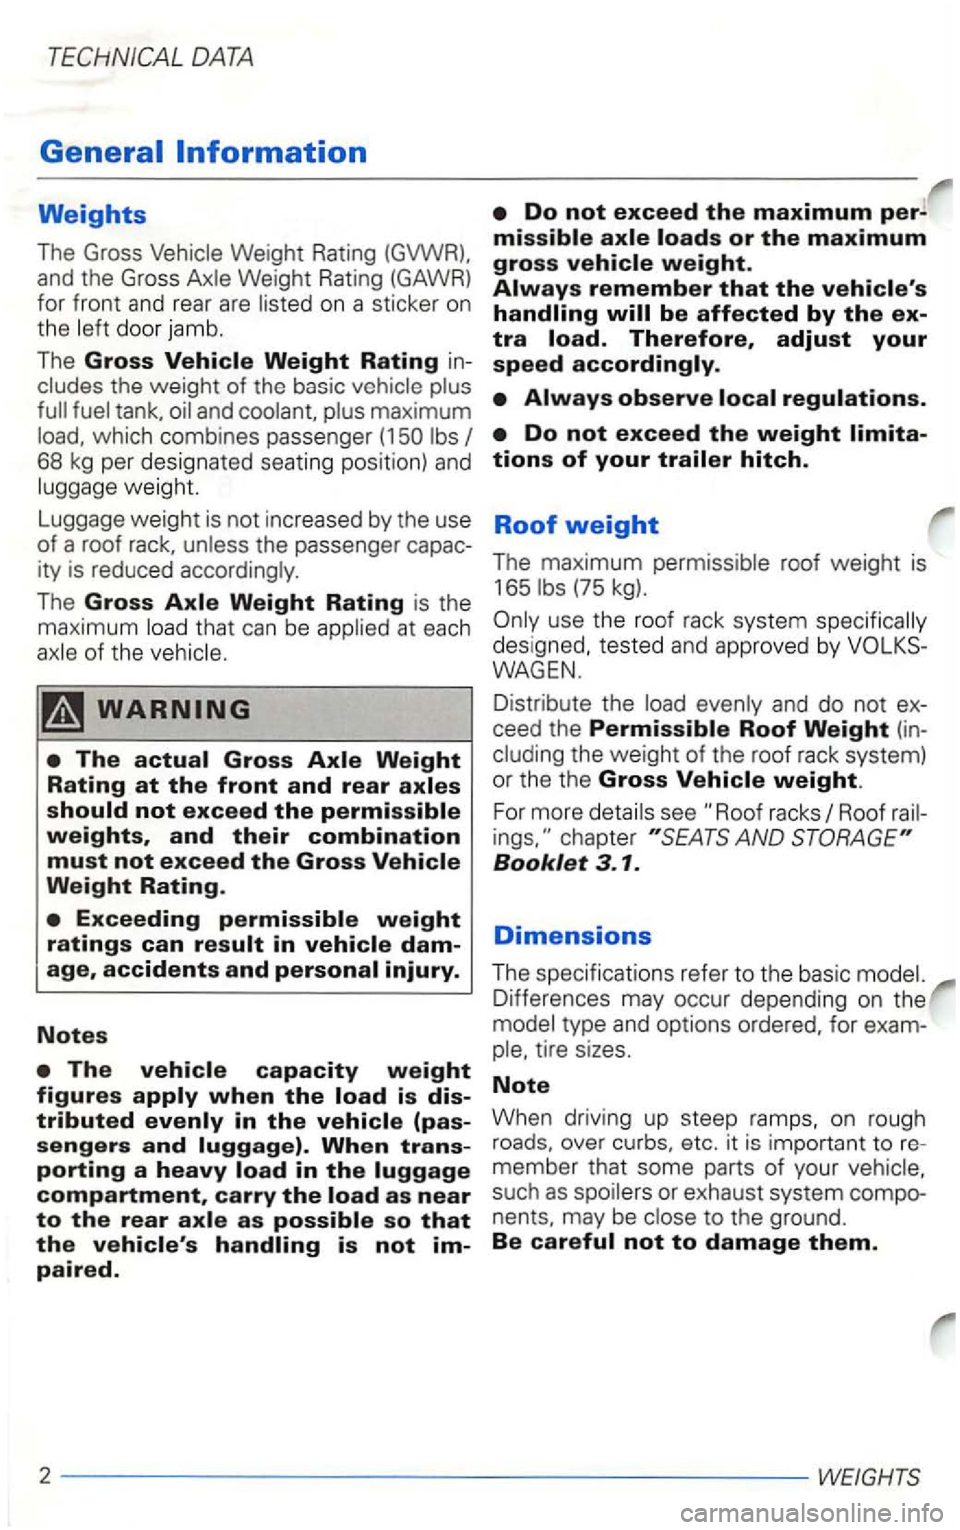 VOLKSWAGEN GOLF 2003  Owners Manual the weight  of the  basic 
68 kg per  designated seating  position)  an d weight. 
(75 kg). The Gross Axle Weight Rating is  the 
maximum 
des igned,  tested  and approv ed by 
The actual Gross Axle W